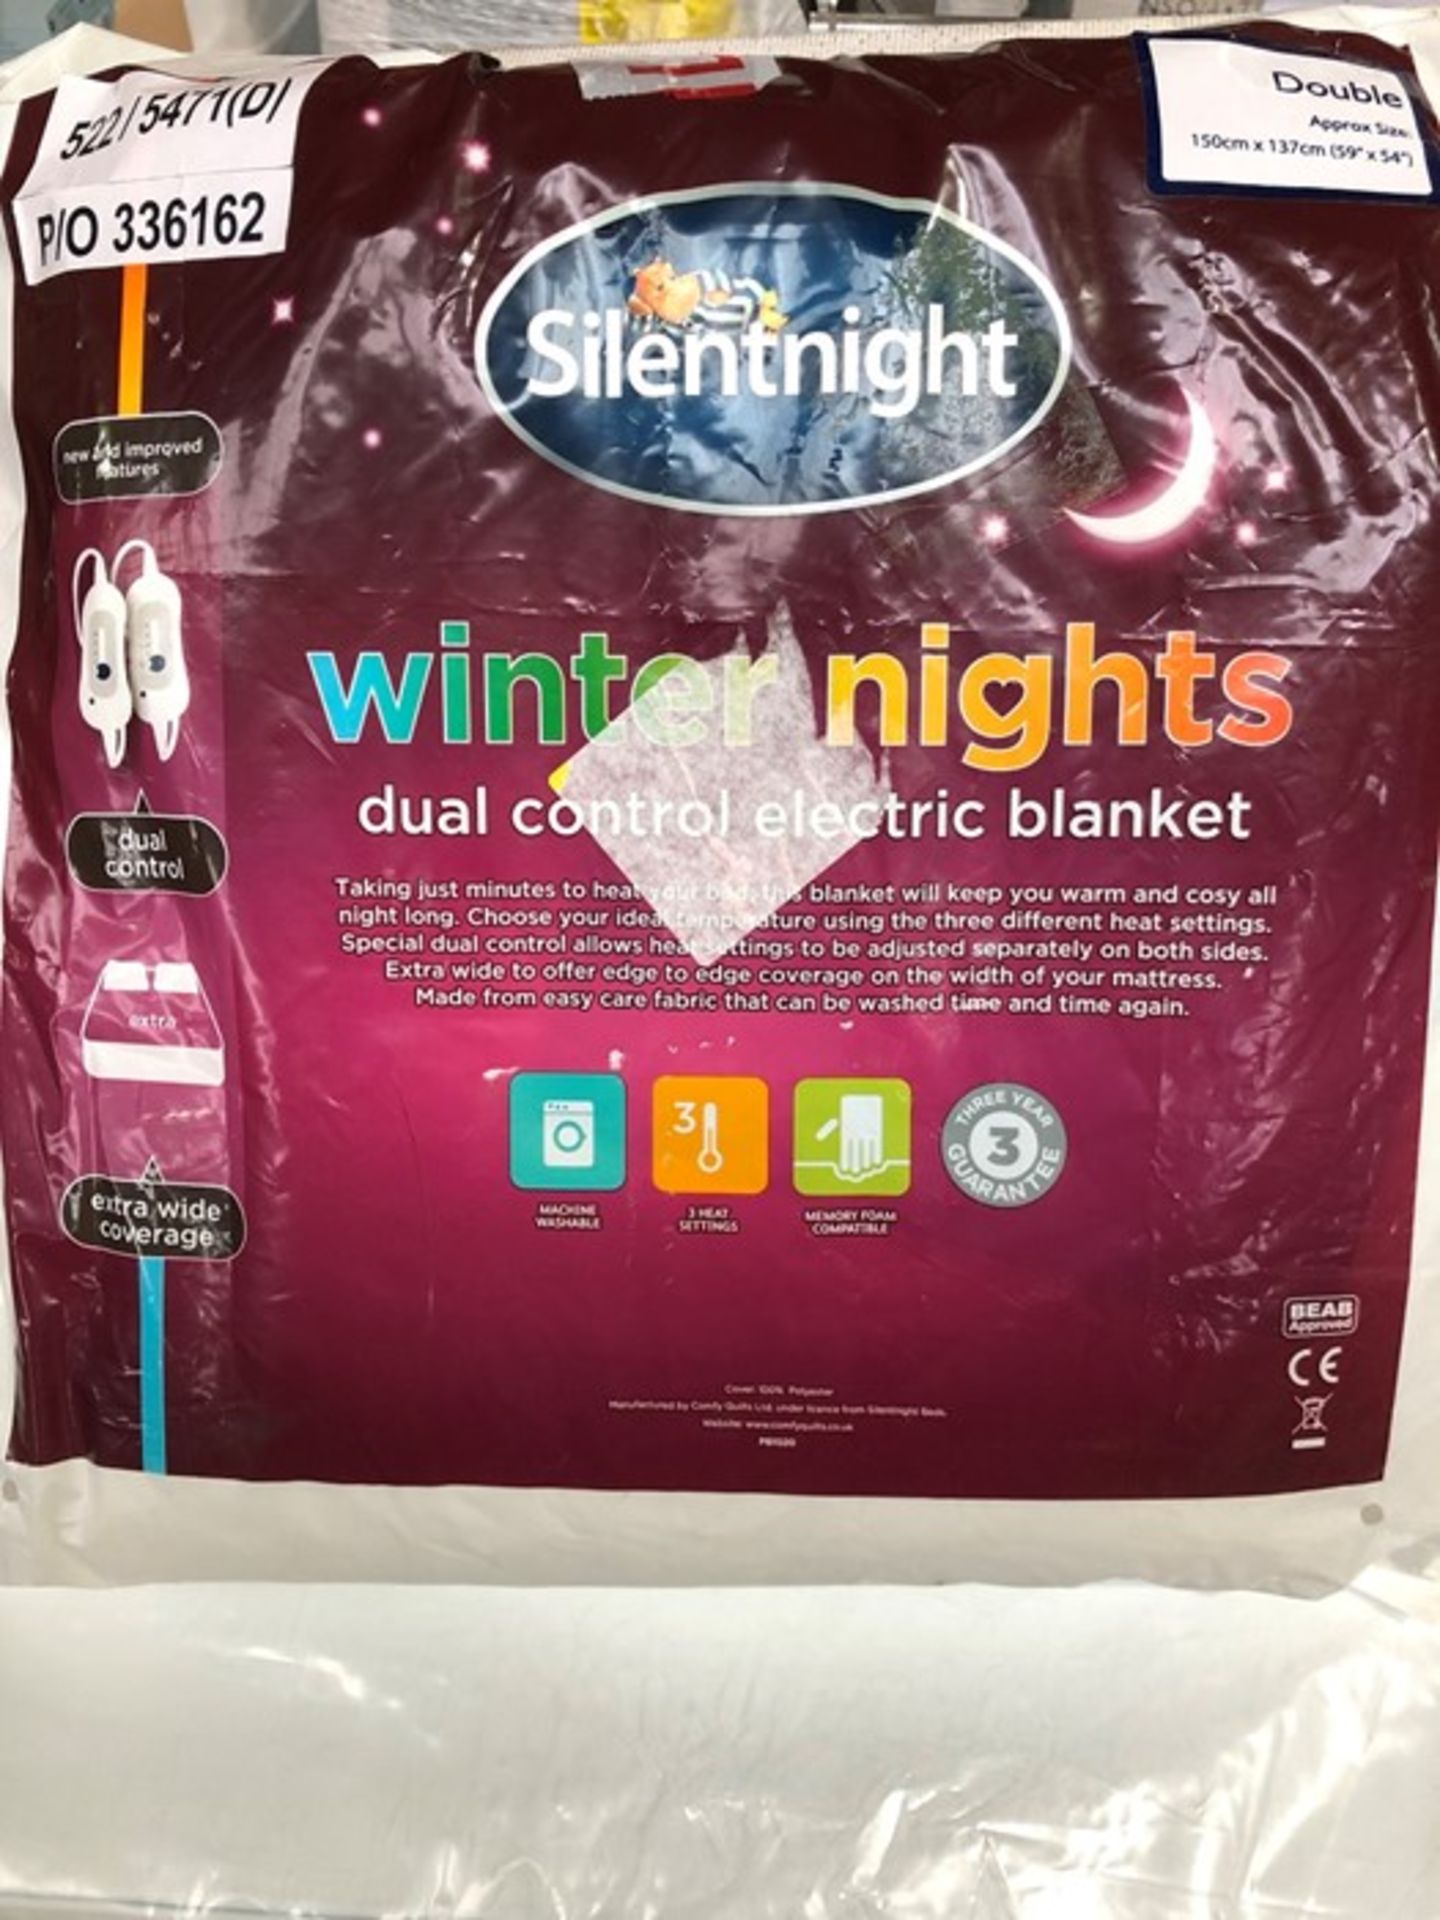 1 BAGGED SILENTNIGHT DUAL CONTROL ELECTRIC BLANKET / SIZE - DOUBLE (VIEWING HIGHLY RECOMMENDED)